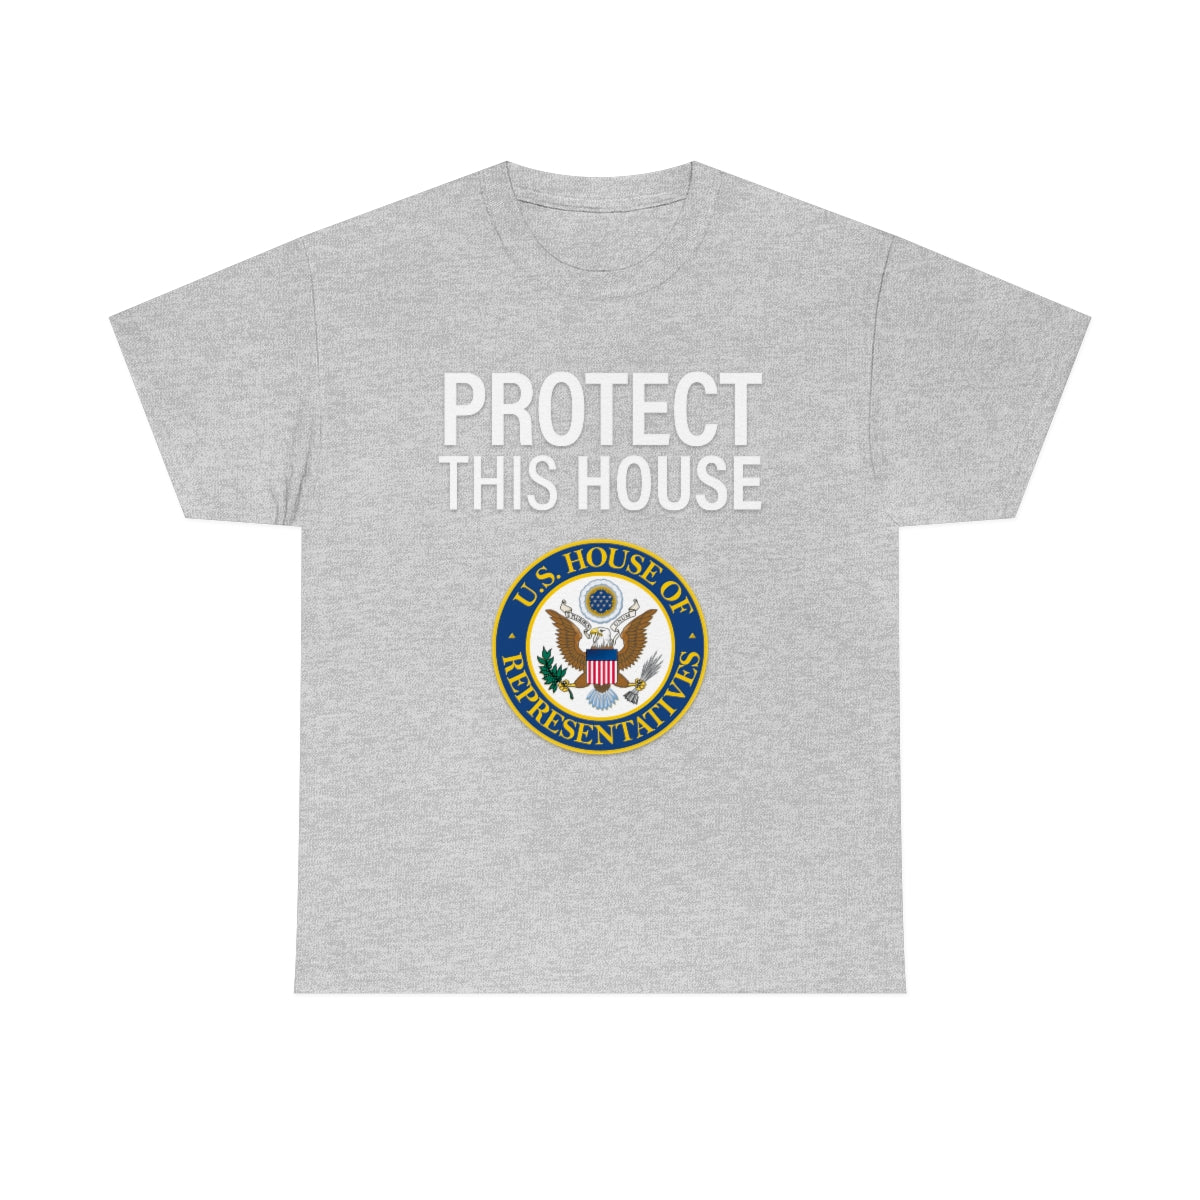 Protect This House - Shirt